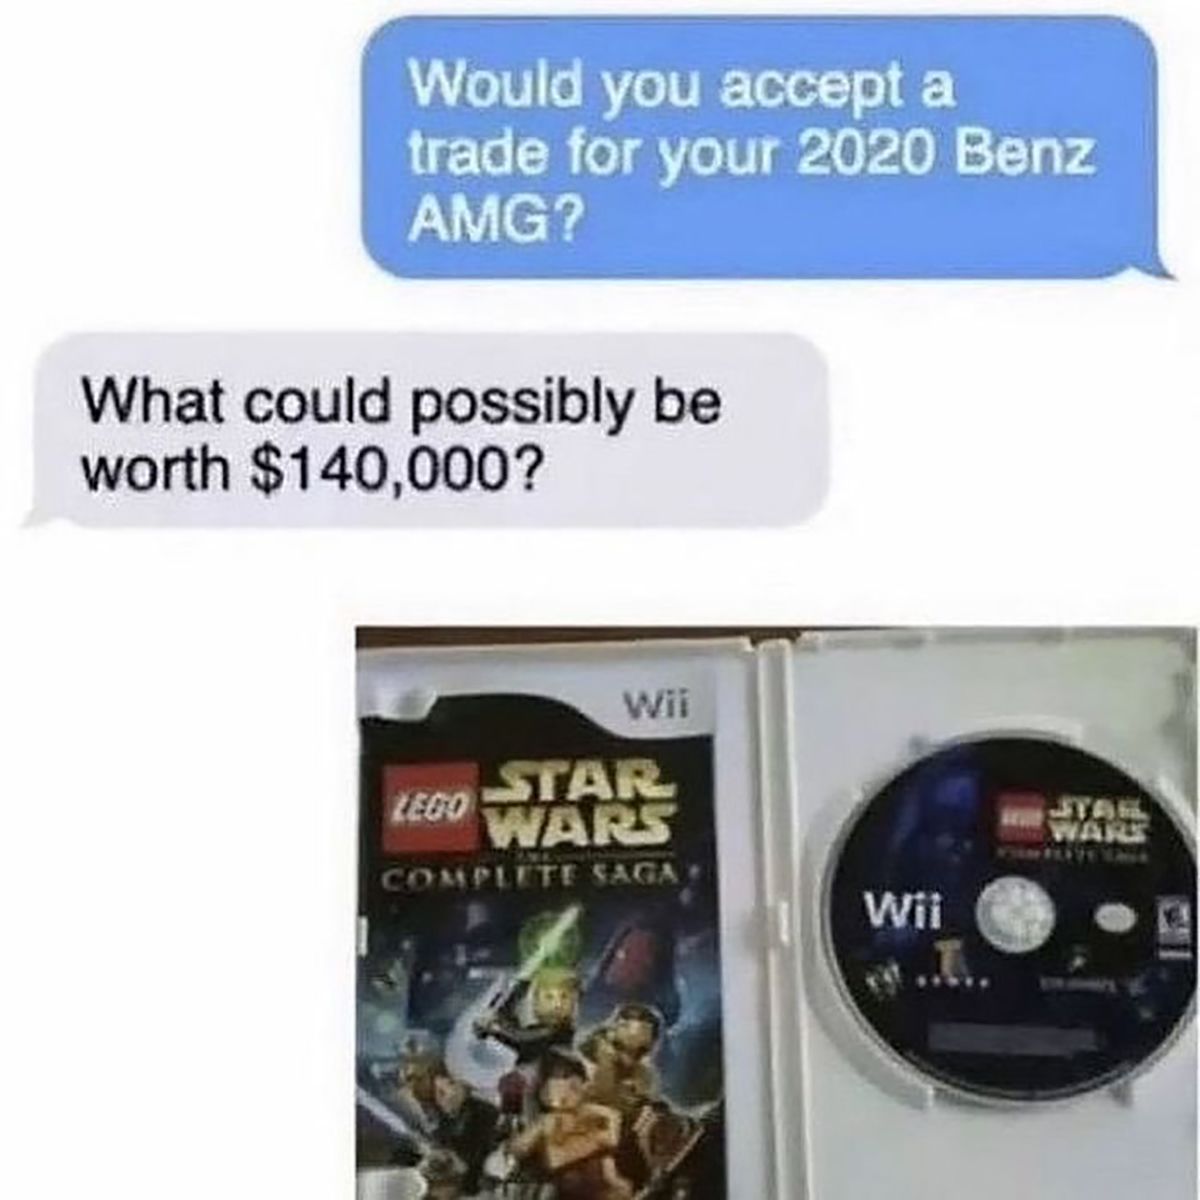 gaming memes - would you accept a trade for your benz - Would you accept a trade for your 2020 Benz Amg? What could possibly be worth $140,000? Wii Star Wars Complete Saga Lego Wii Star